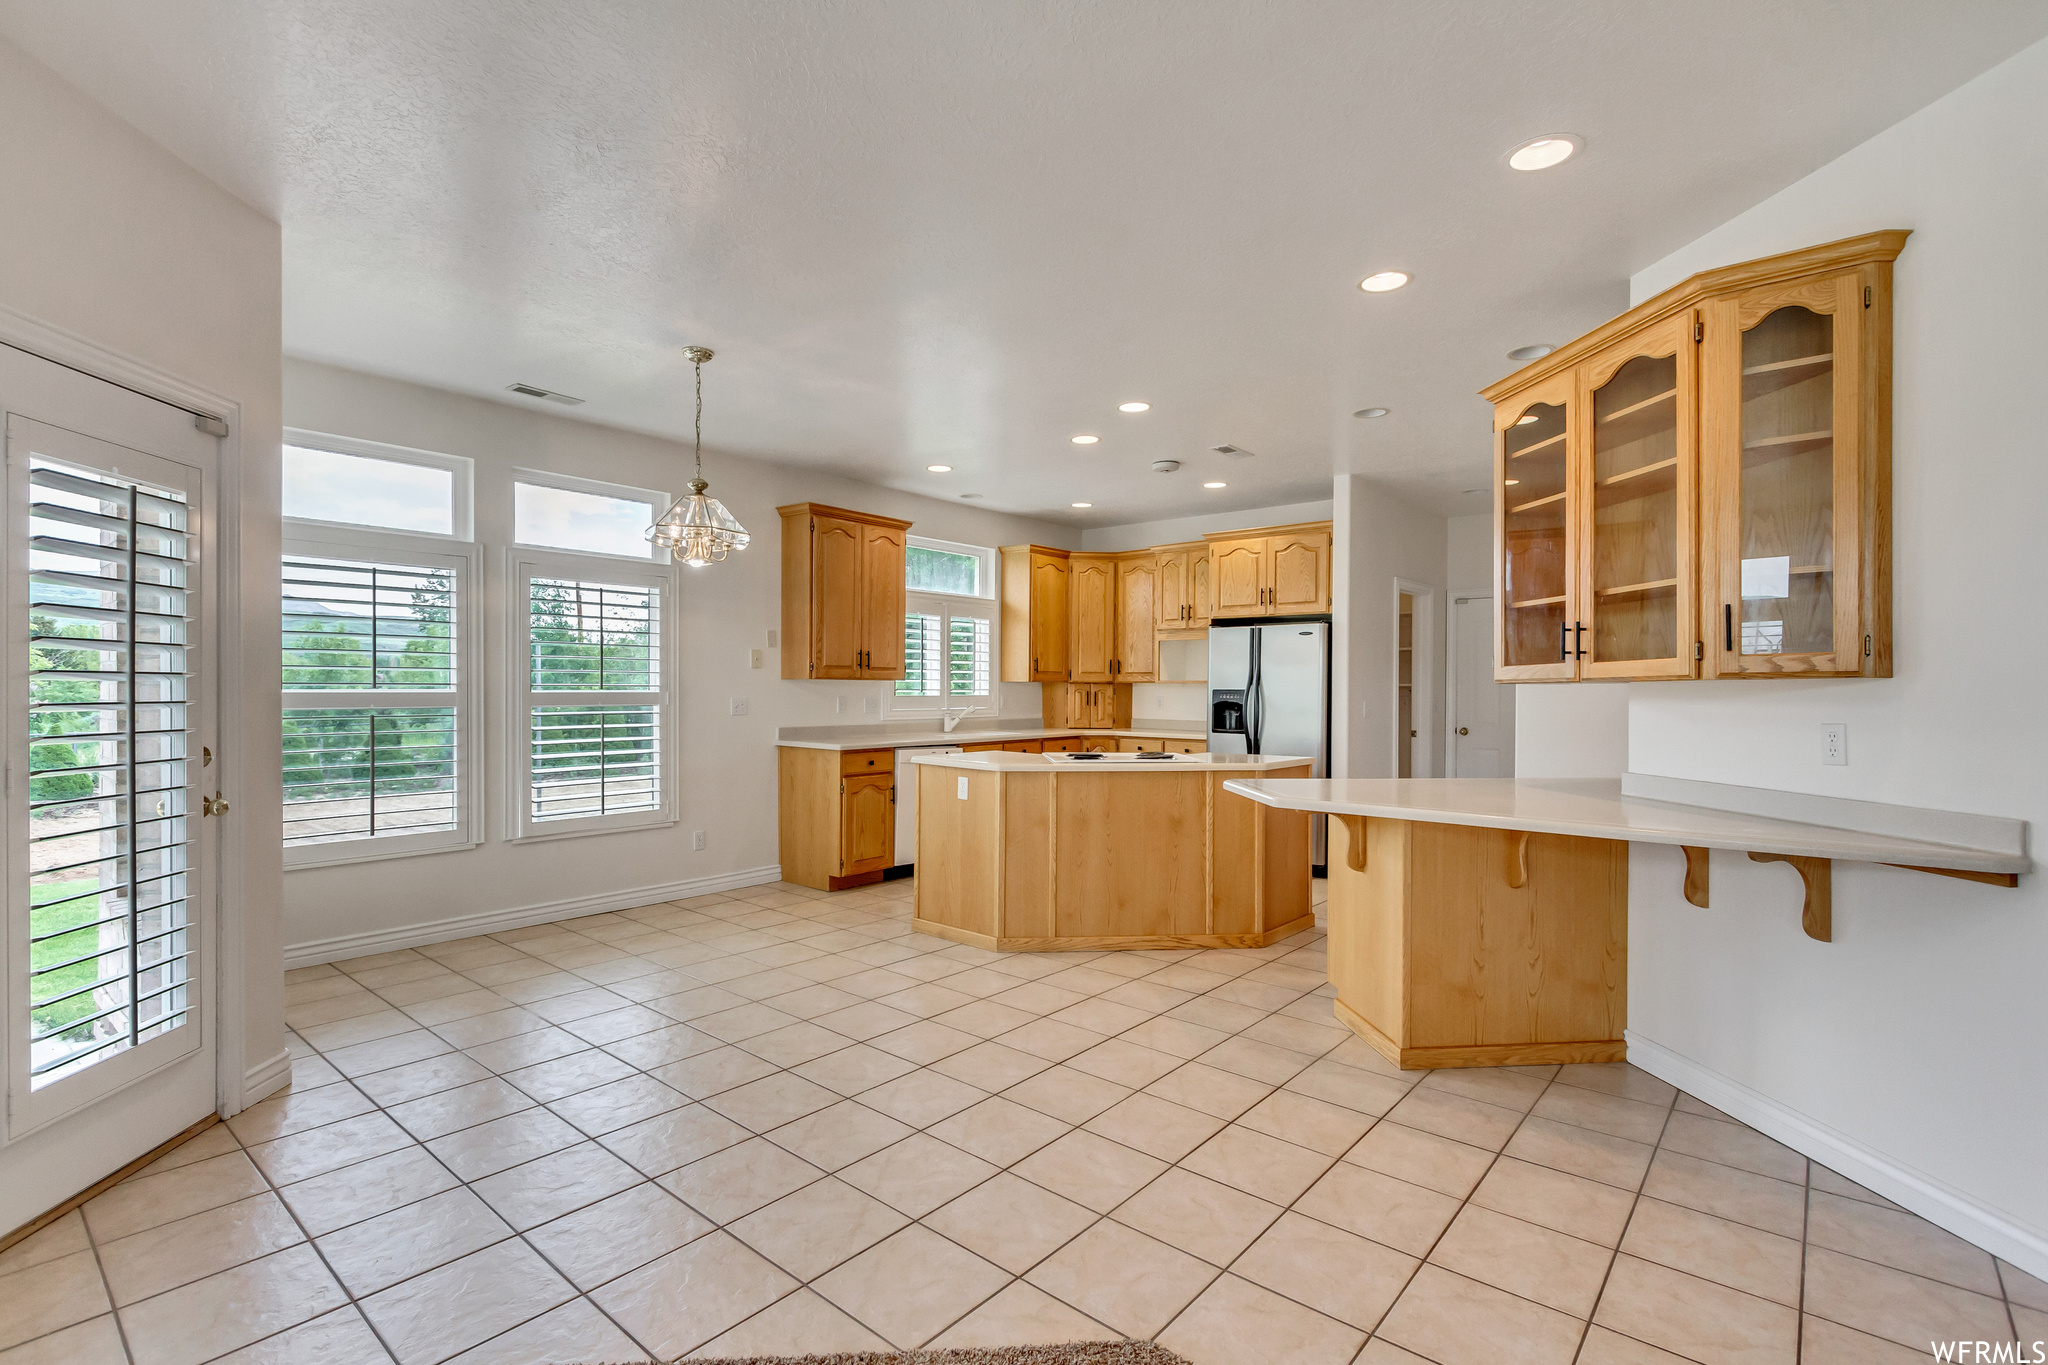 Kitchen with plenty of natural light, light countertops, light tile floors, brown cabinetry, and pendant lighting